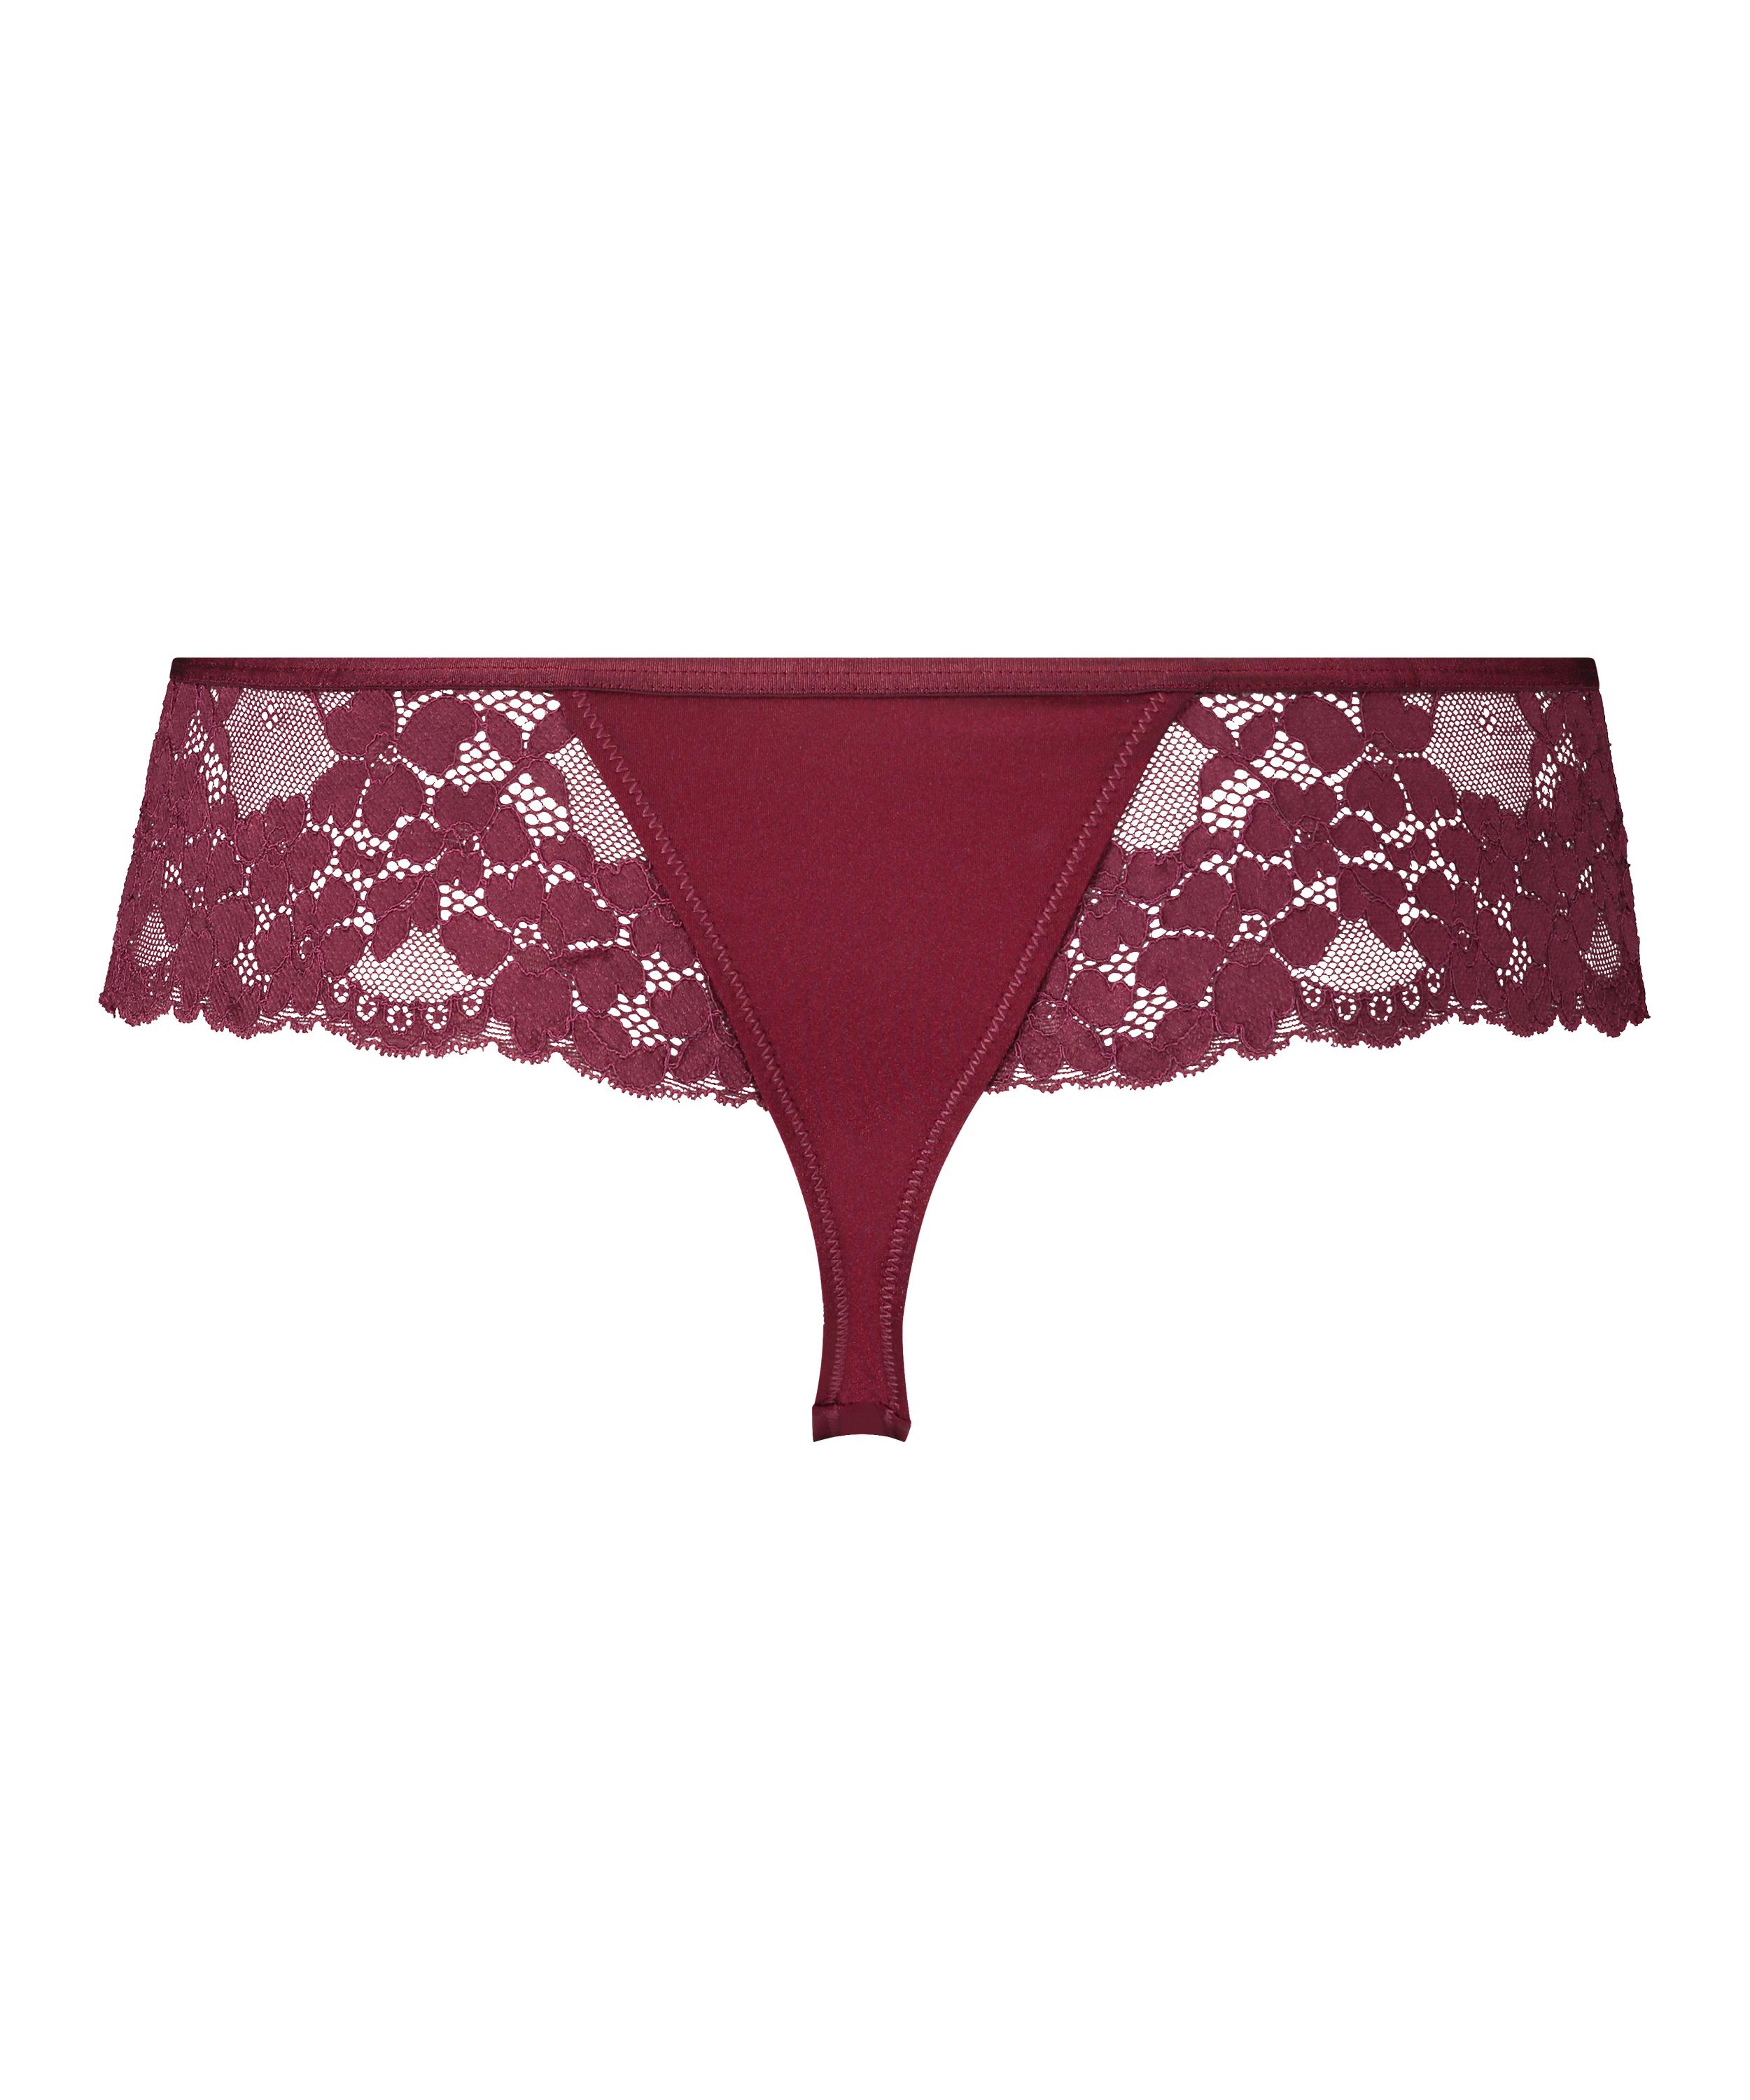 Boxerstring Nellie, Rood, main